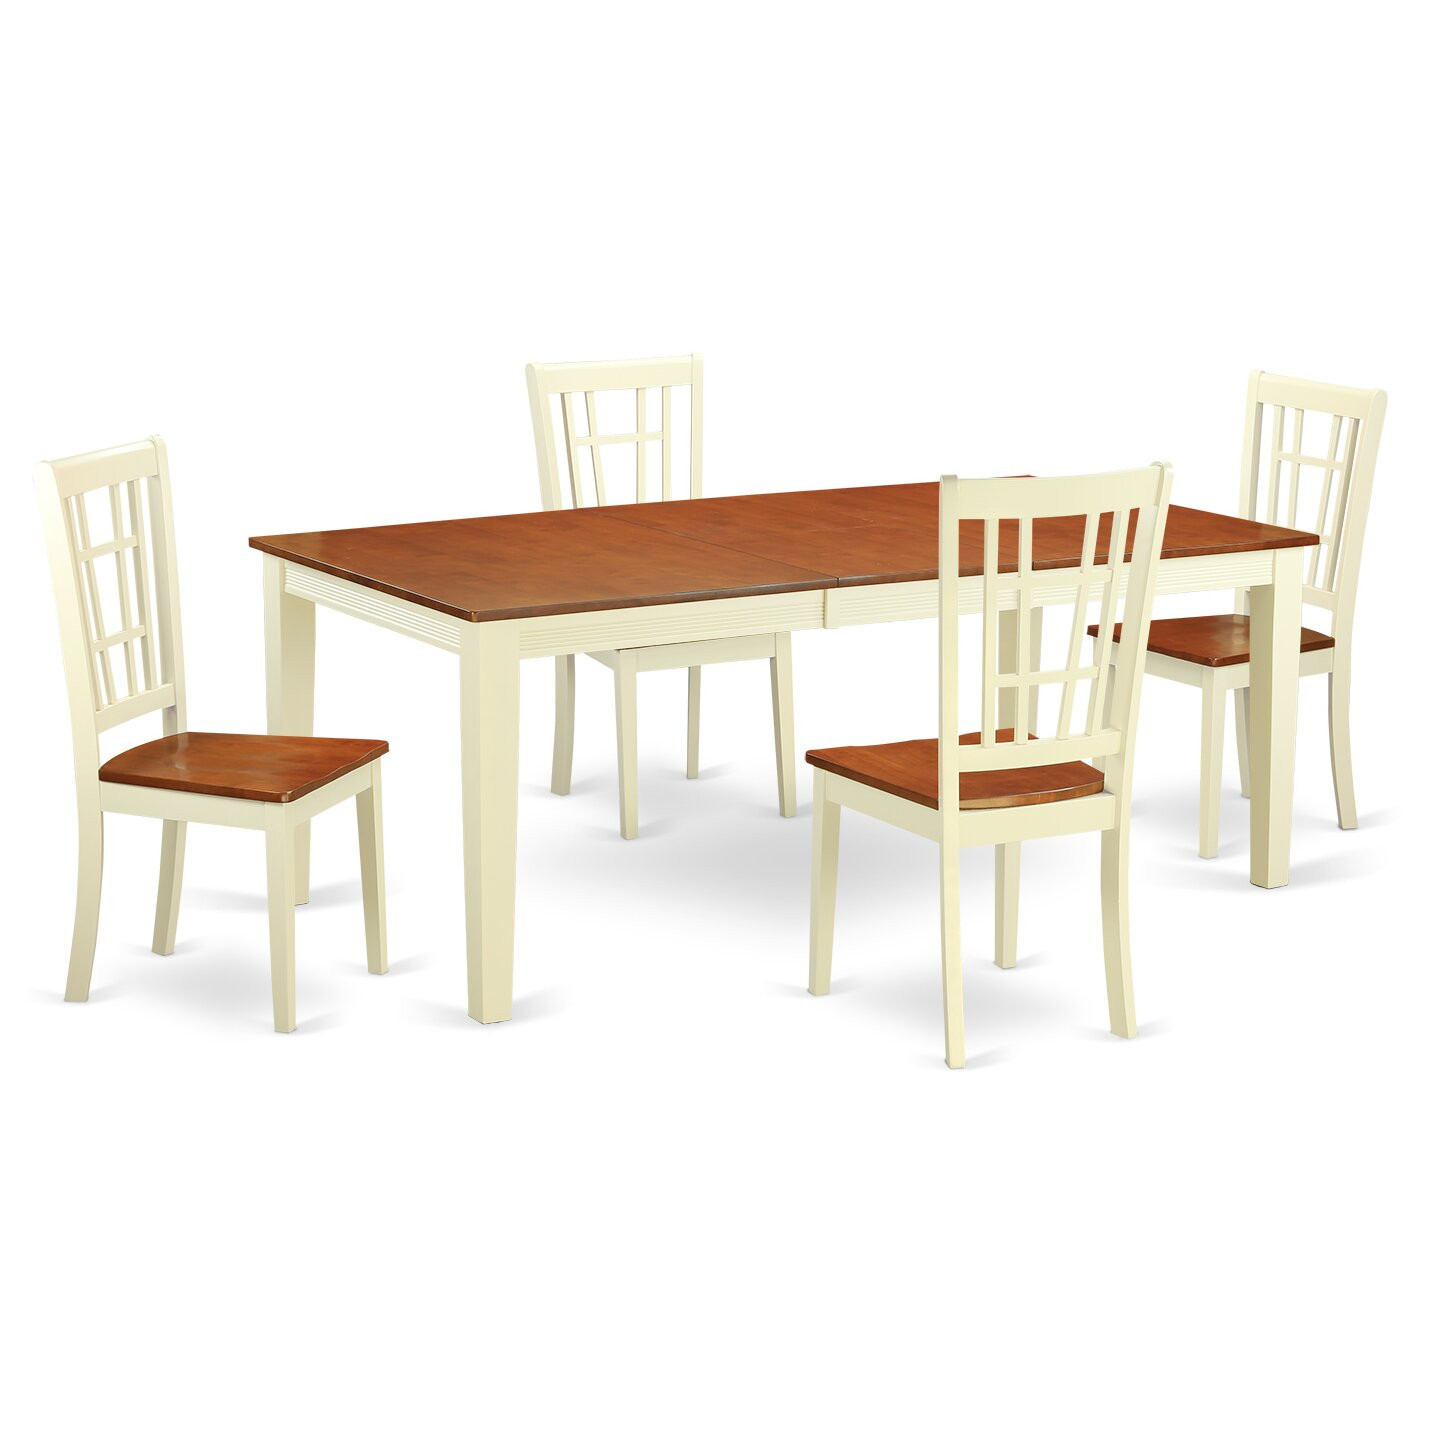 Wayfair Small Kitchen Tables
 East West Quincy 5 Piece Dining Set